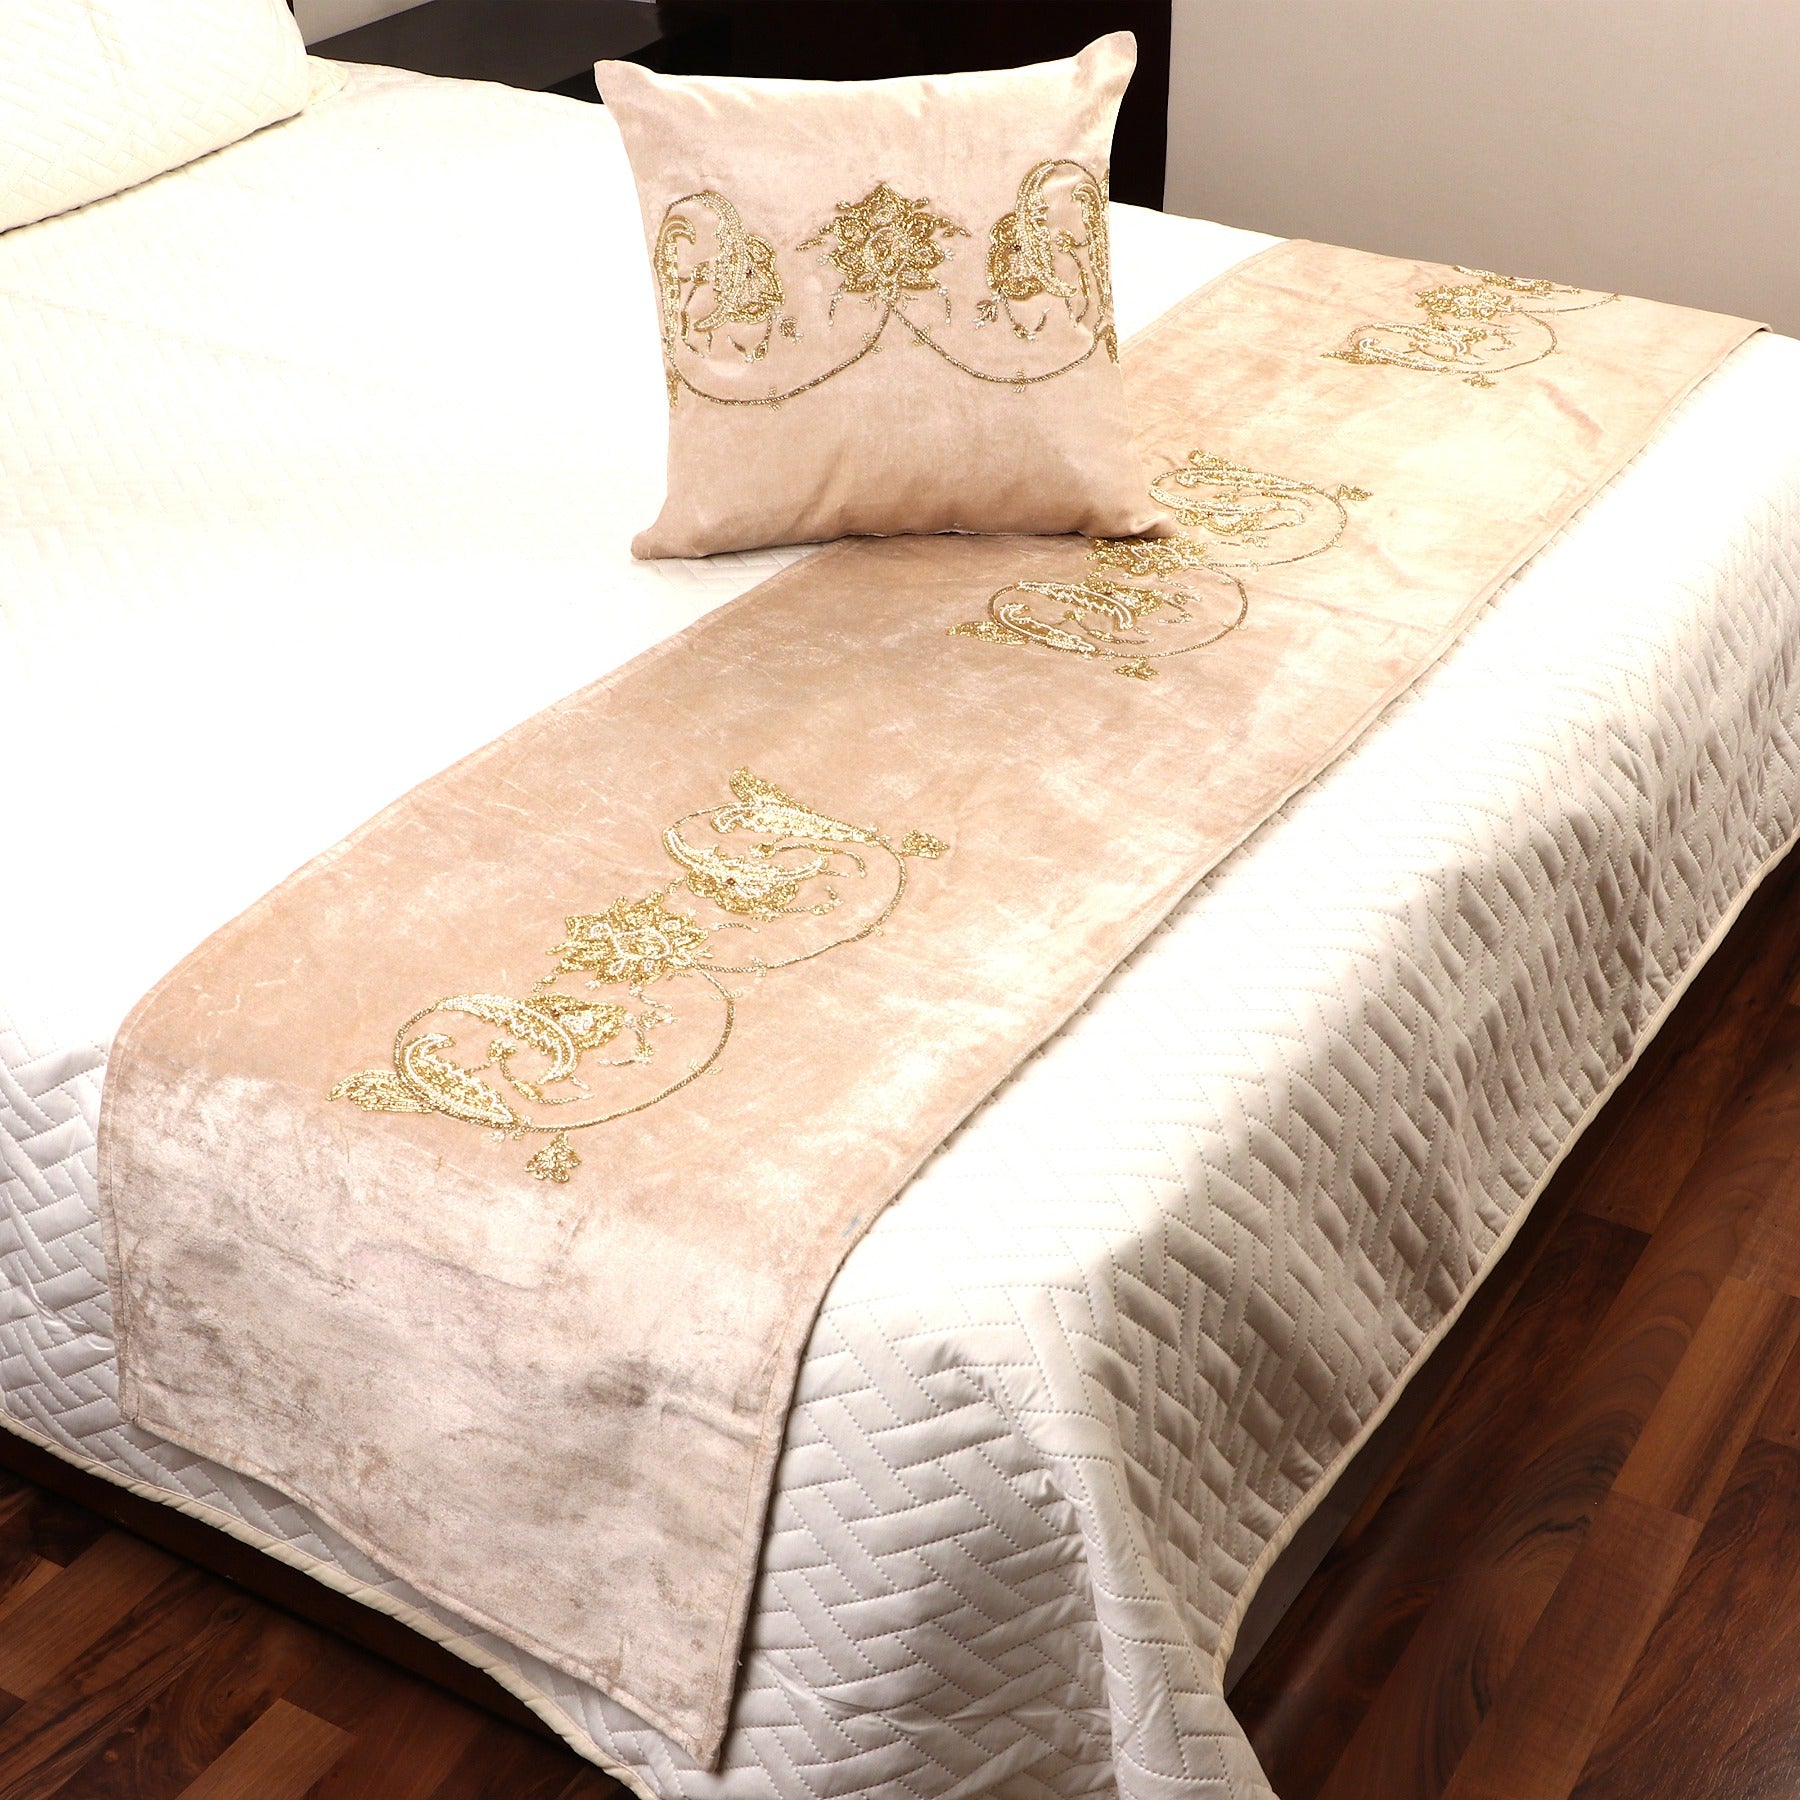 The Victorian Beige Velvet Bed Runner With Matching Decorative Throw Pillows Beaded in victorian Leaf